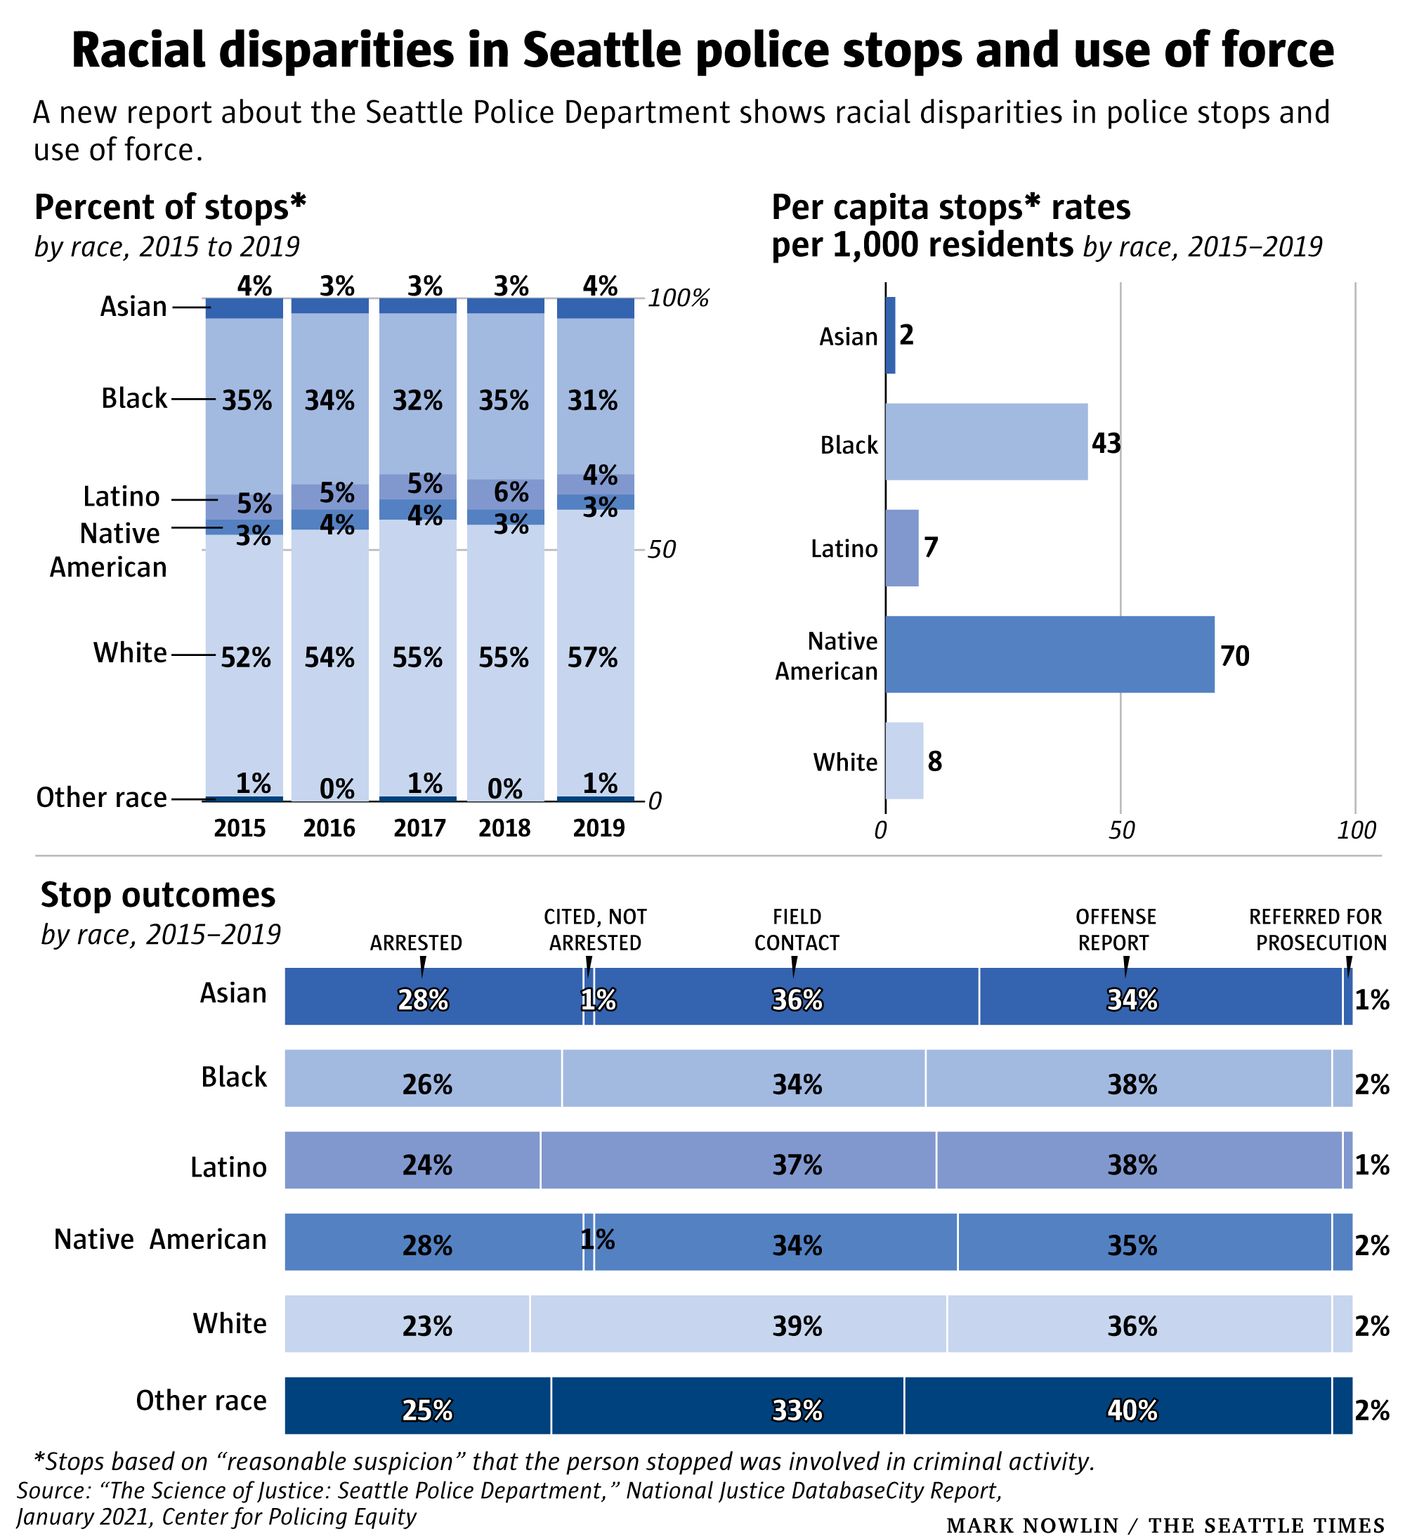 Chart showing racial disparities in Seattle police stops and use of force.